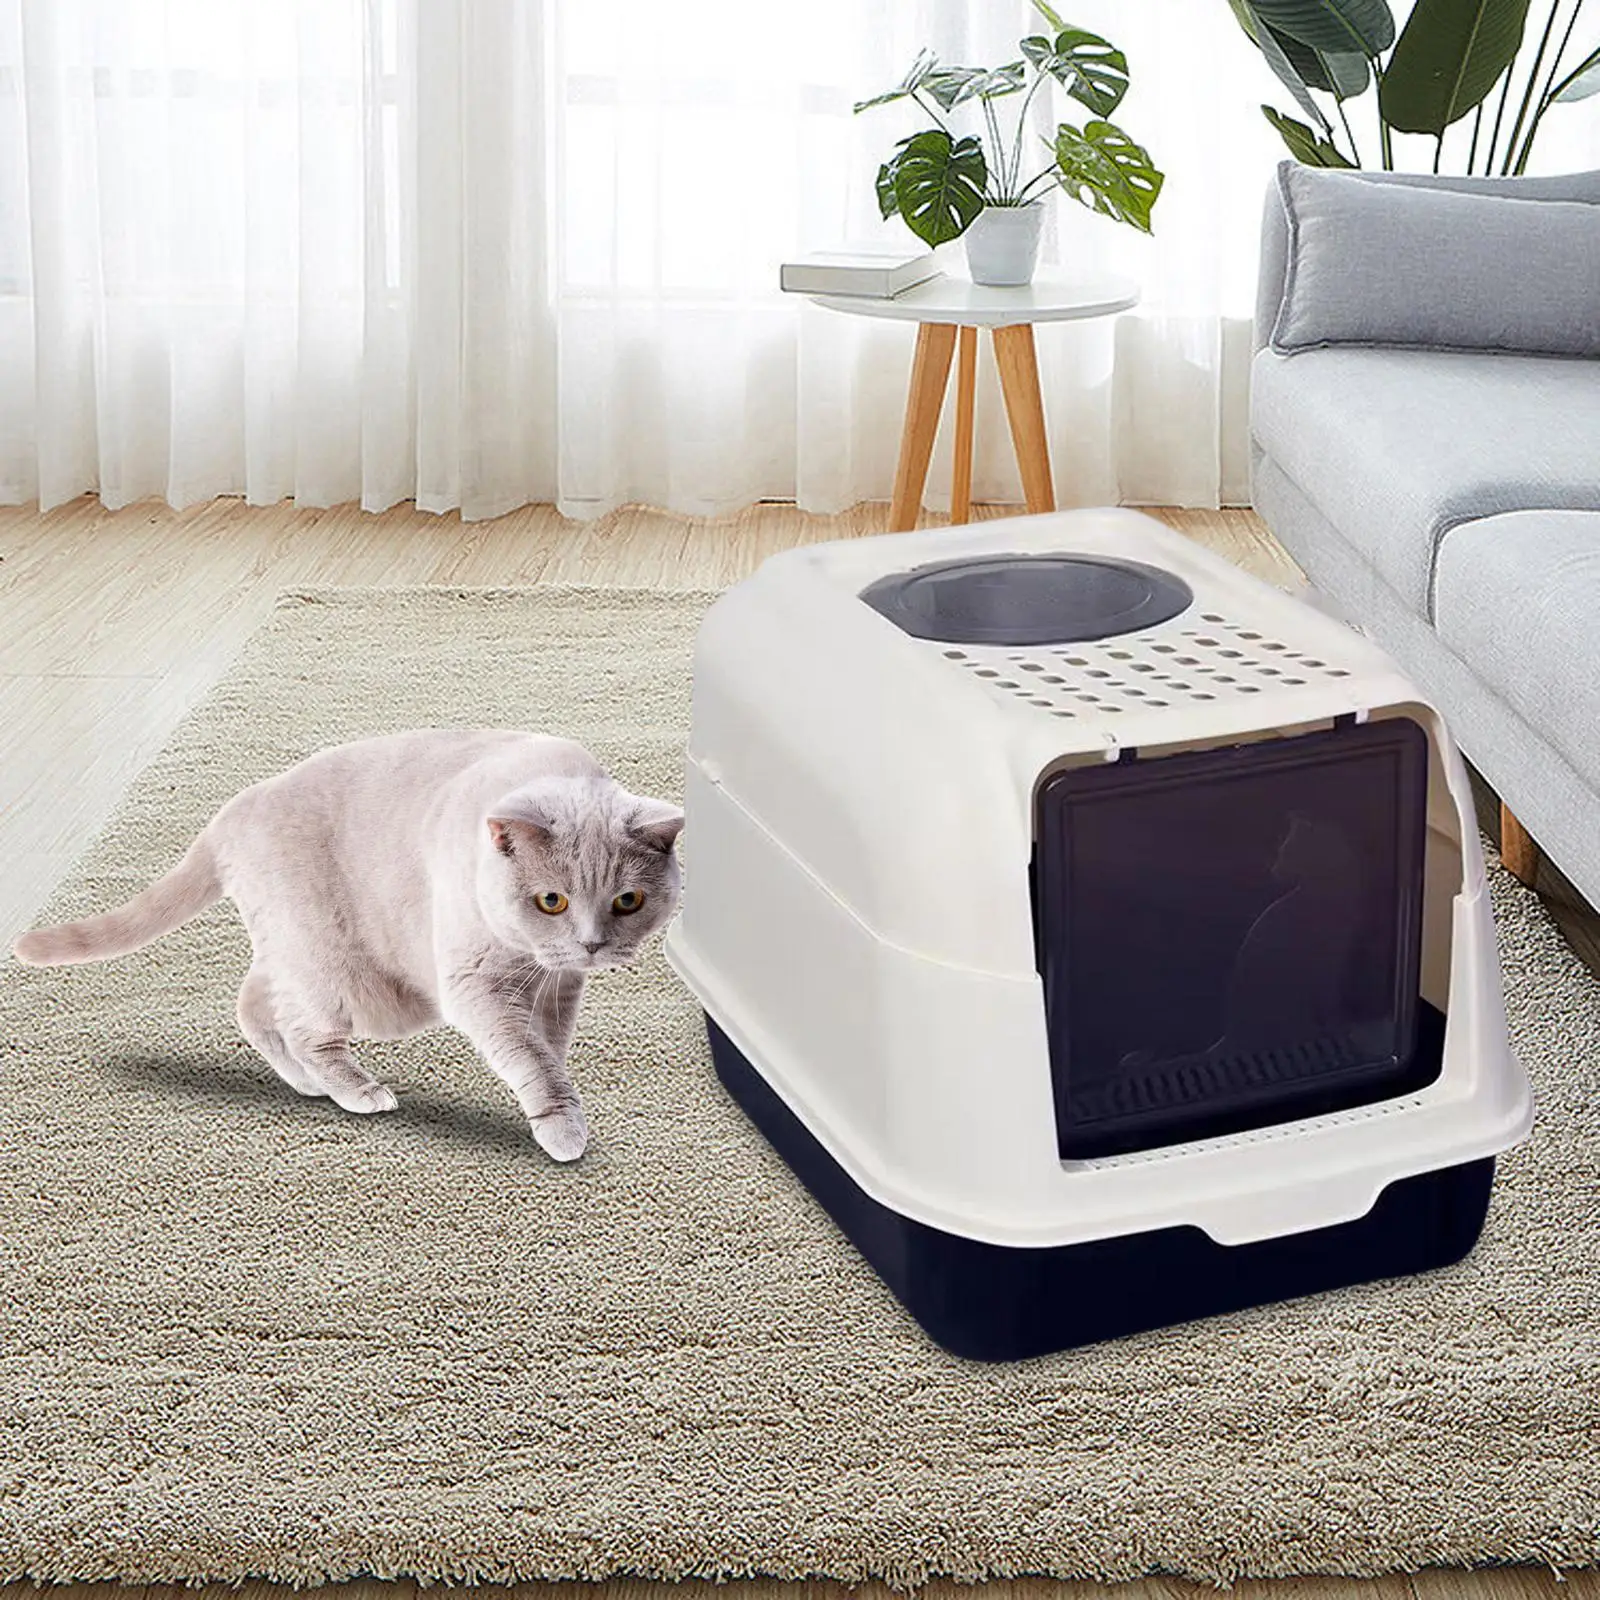 Enclosed Cat Litter Box Kitten Litter Box Covered Cat Litter Tray Anti Large Litter open Top for Pets Small Kitty Dog